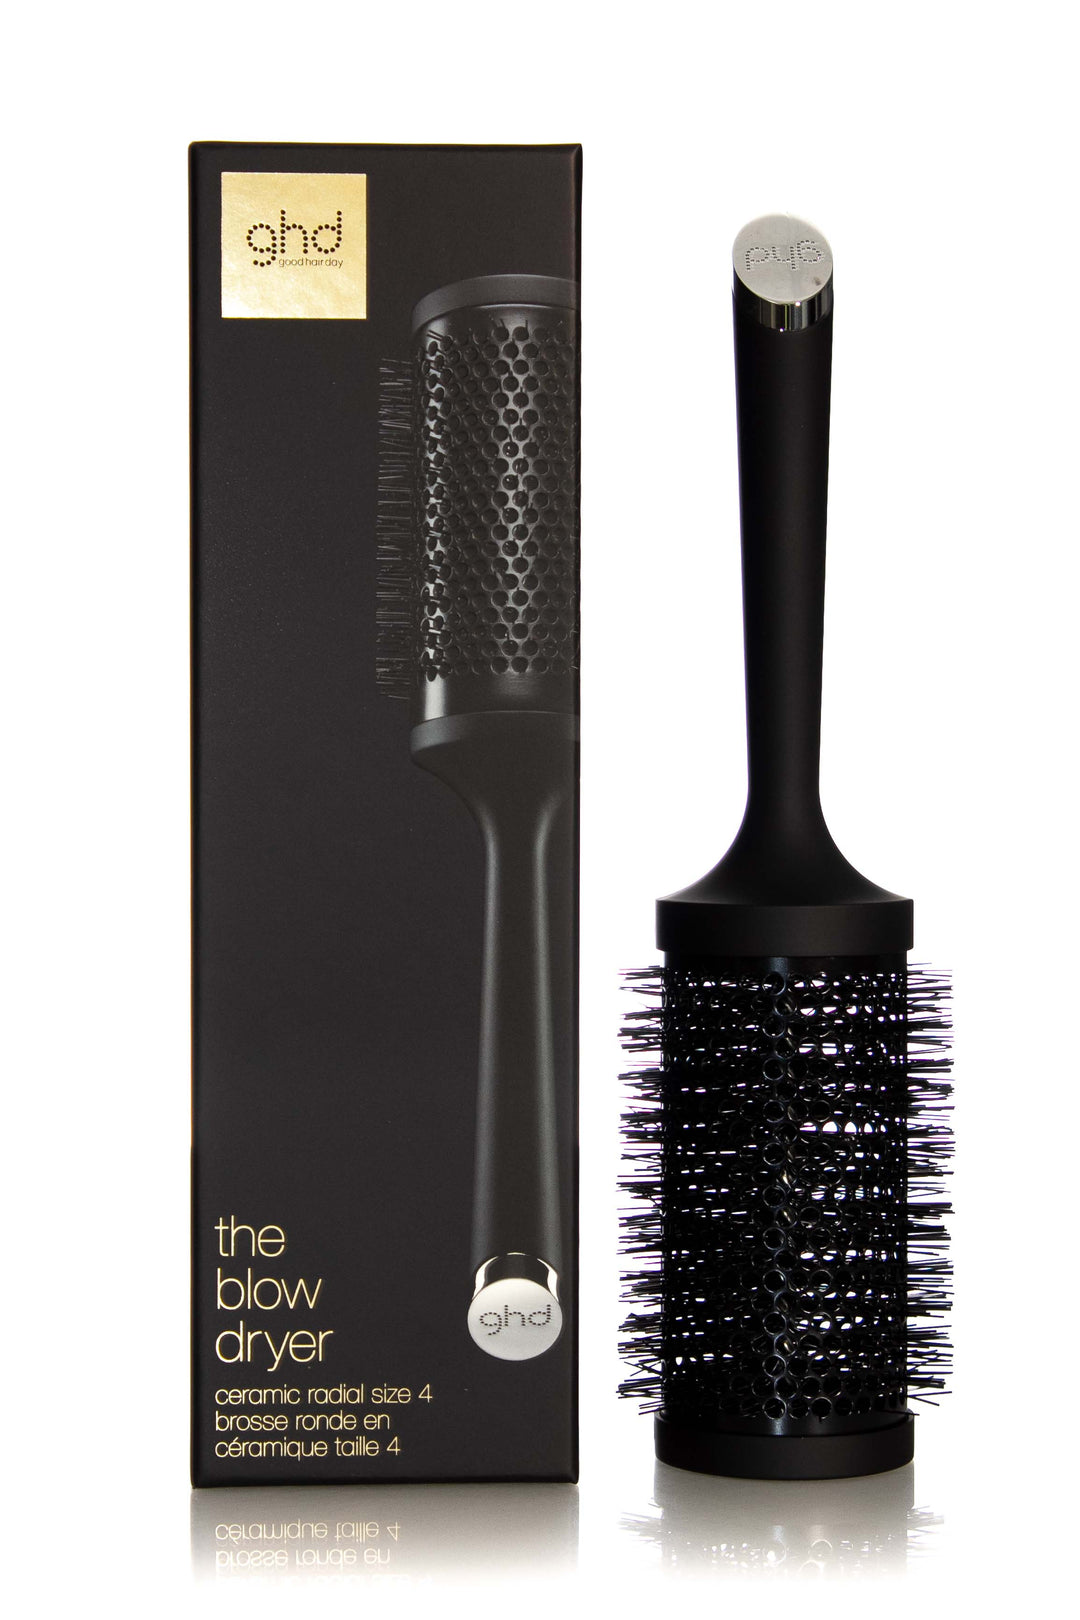 GHD THE BLOW DRYER CERAMIC RADIAL BRUSH SIZE 4